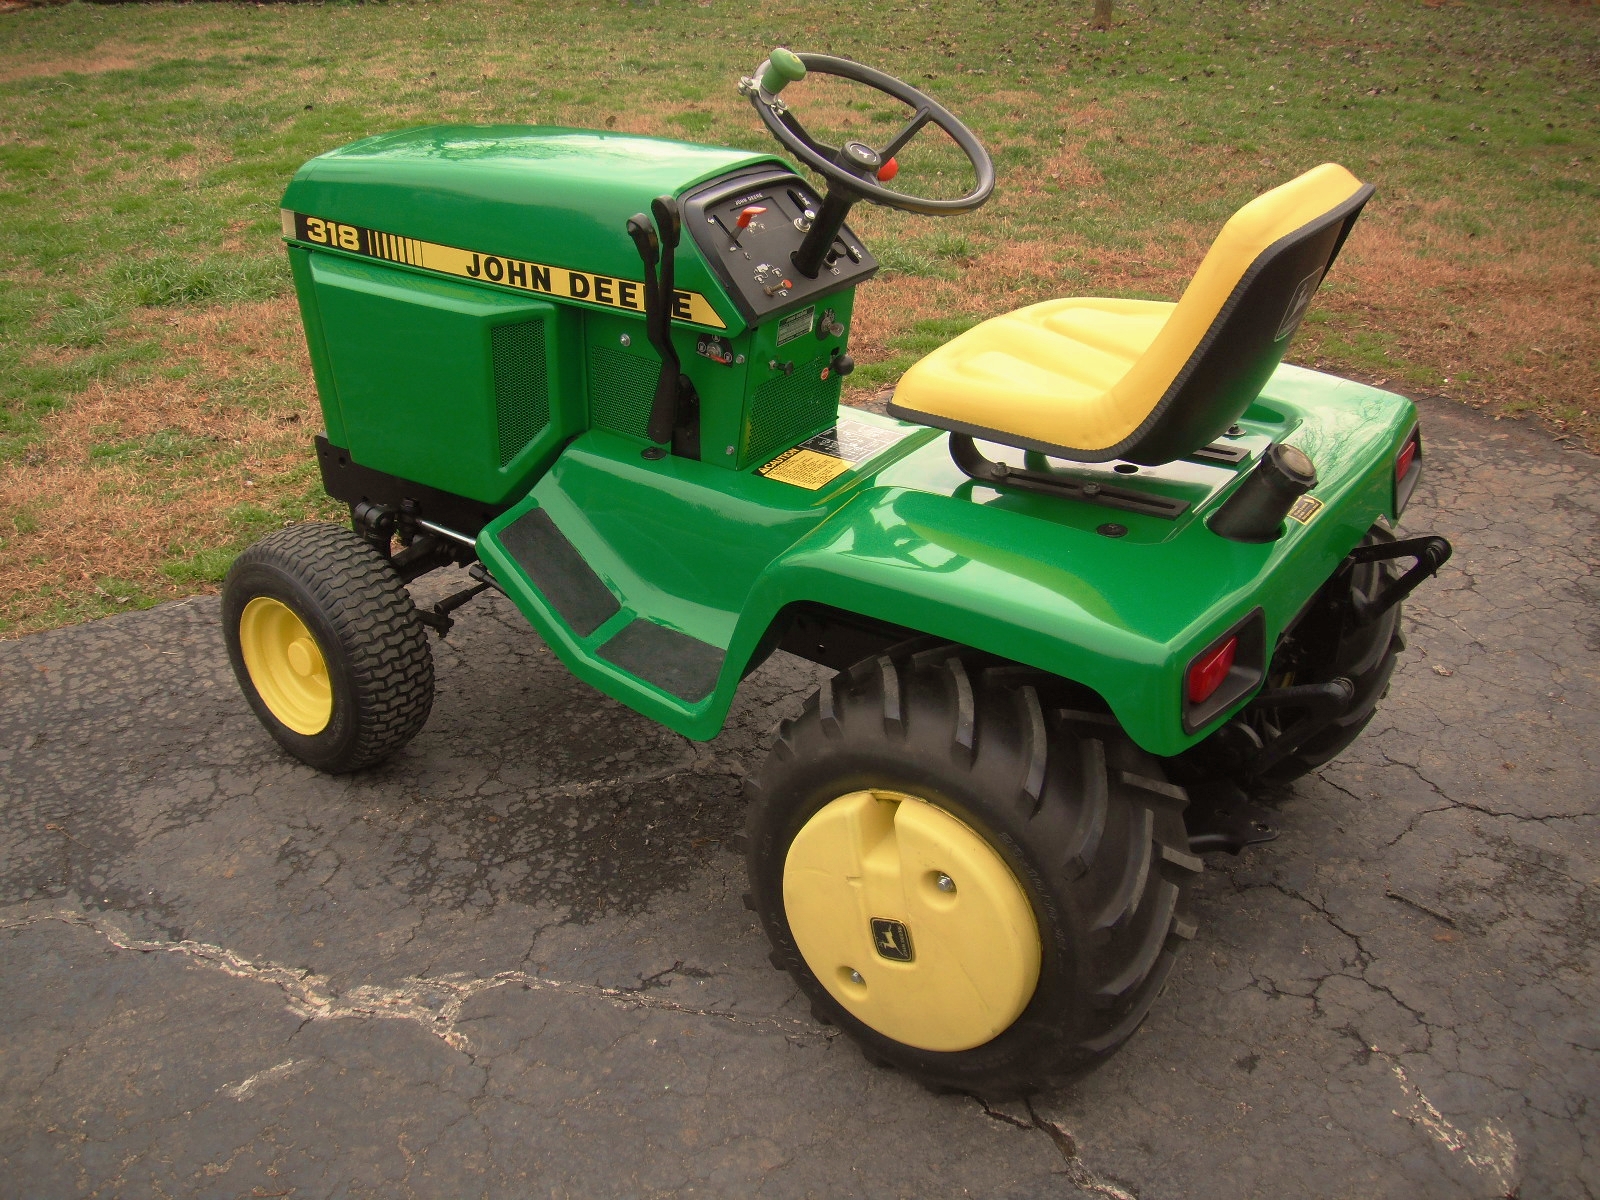 ATTN: All John Deere 318 Owner's if you want it to last Read This !